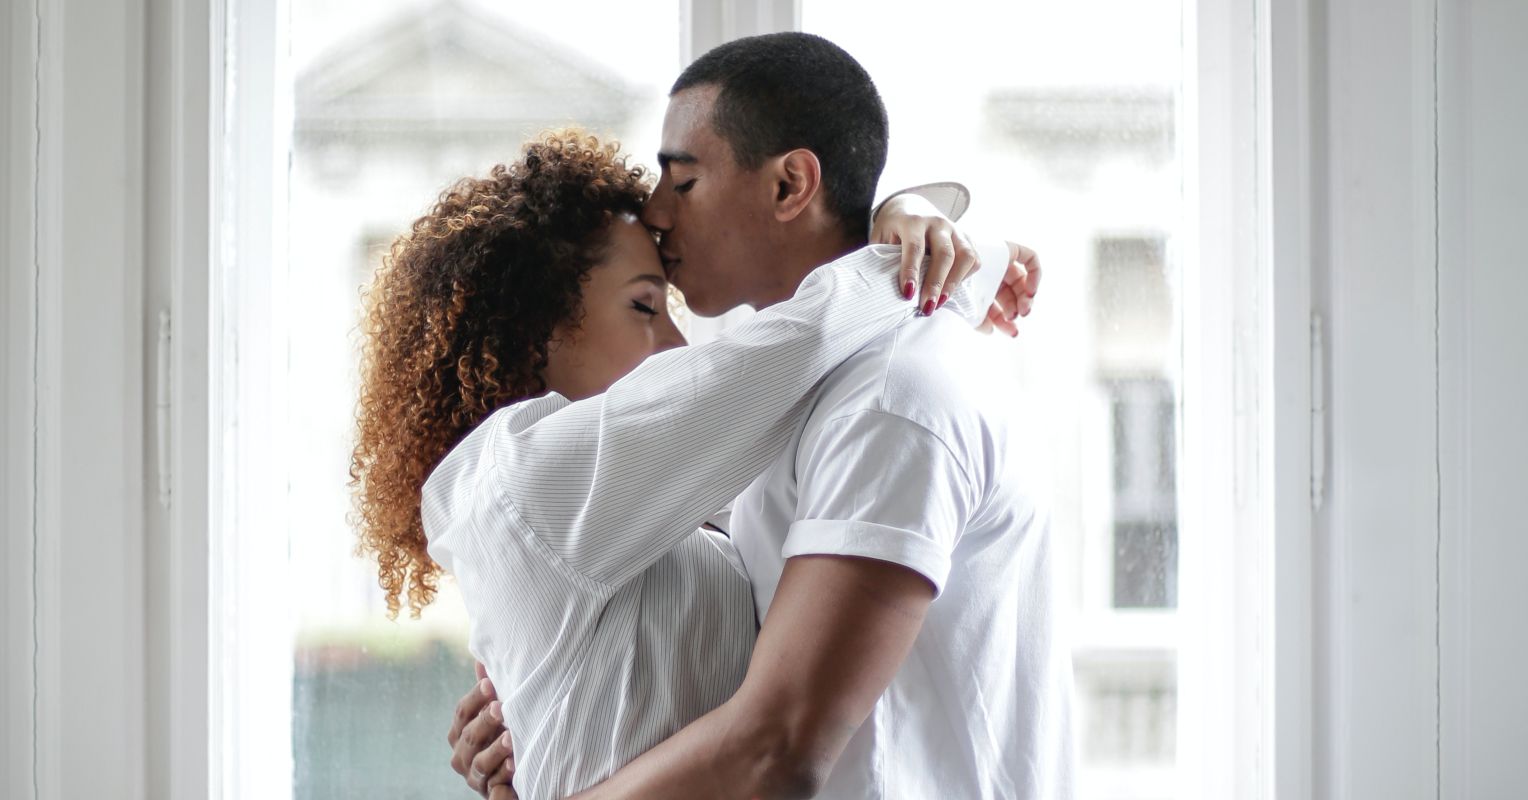 Where in the World Do People Hug and Kiss the Most? | Psychology Today